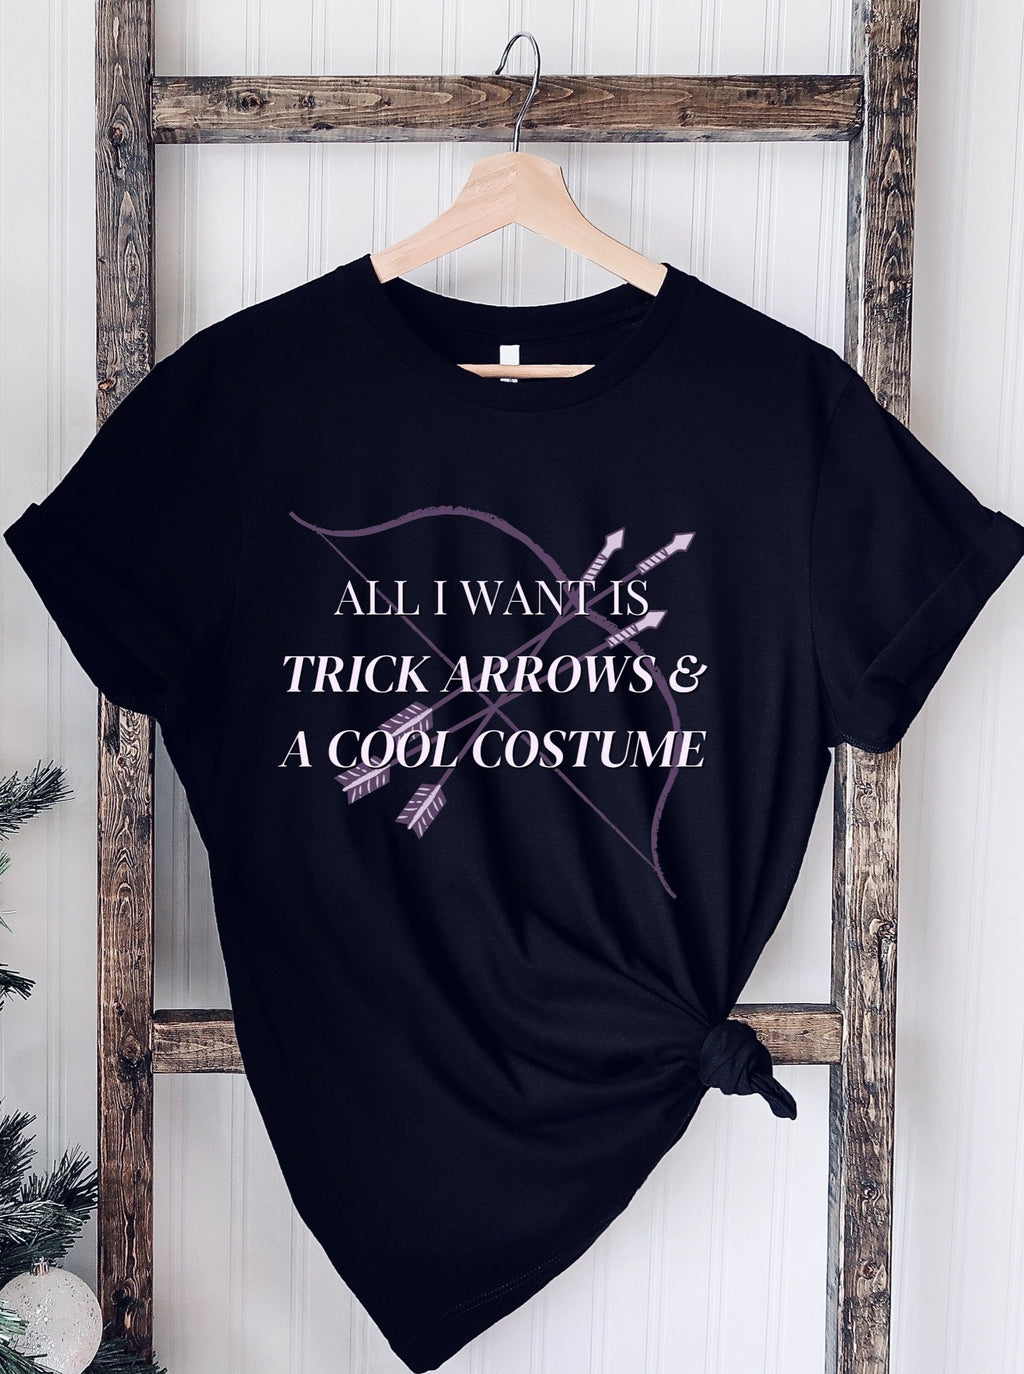 All I Want Is Trick Arrows & A Cool Costume T-shirt